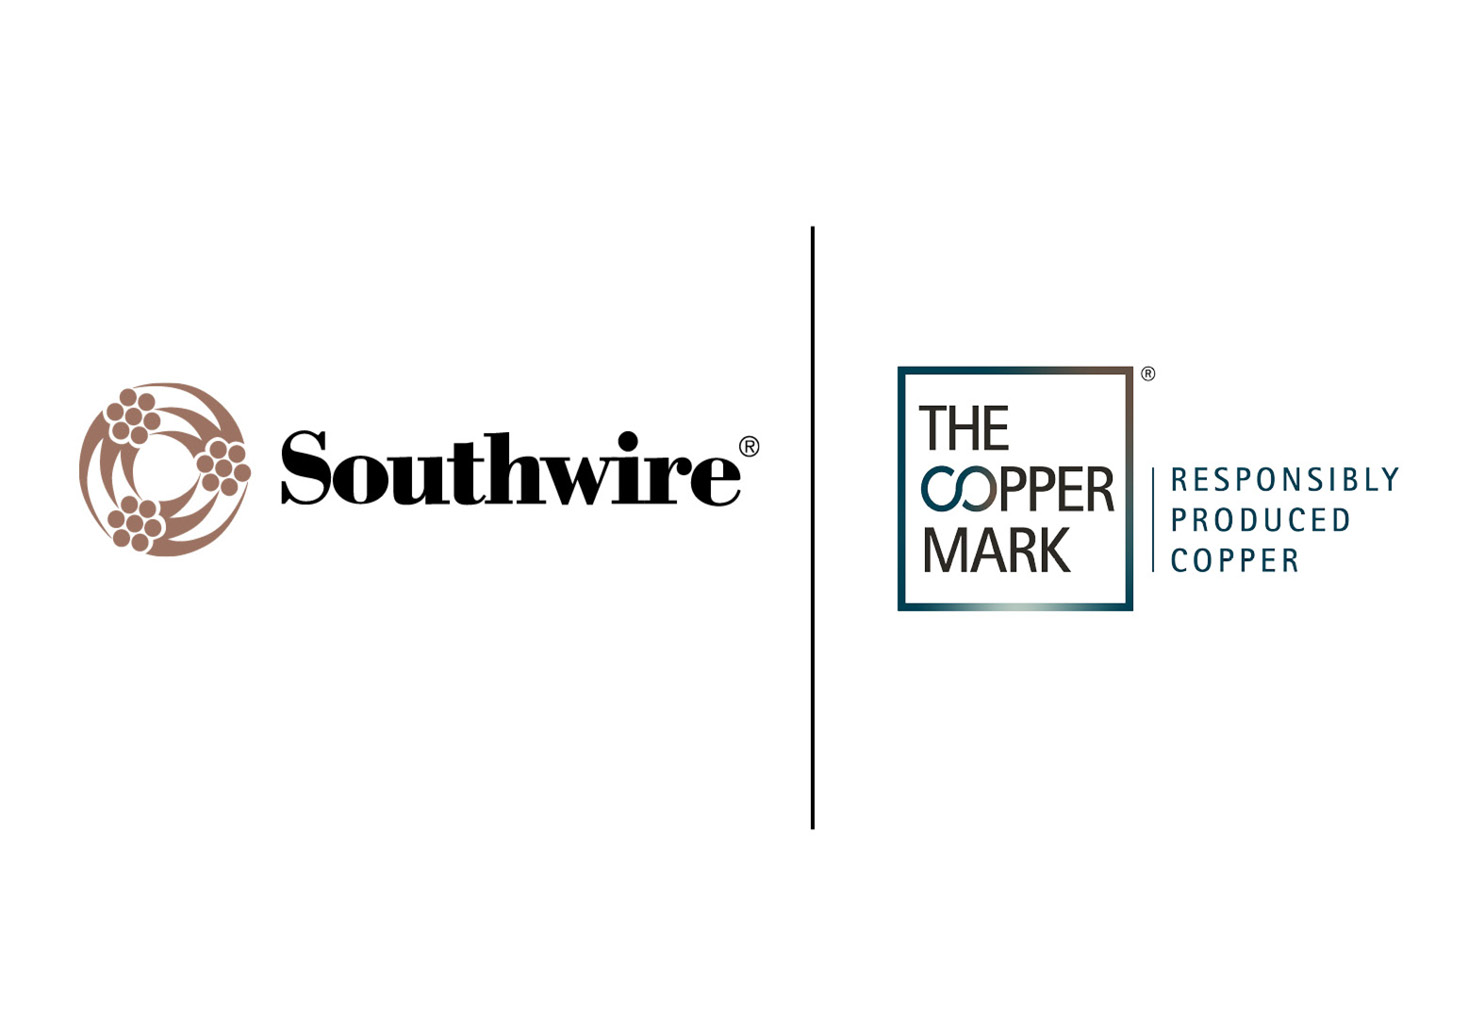 Feature - Southwire and the Copper Mark.jpg